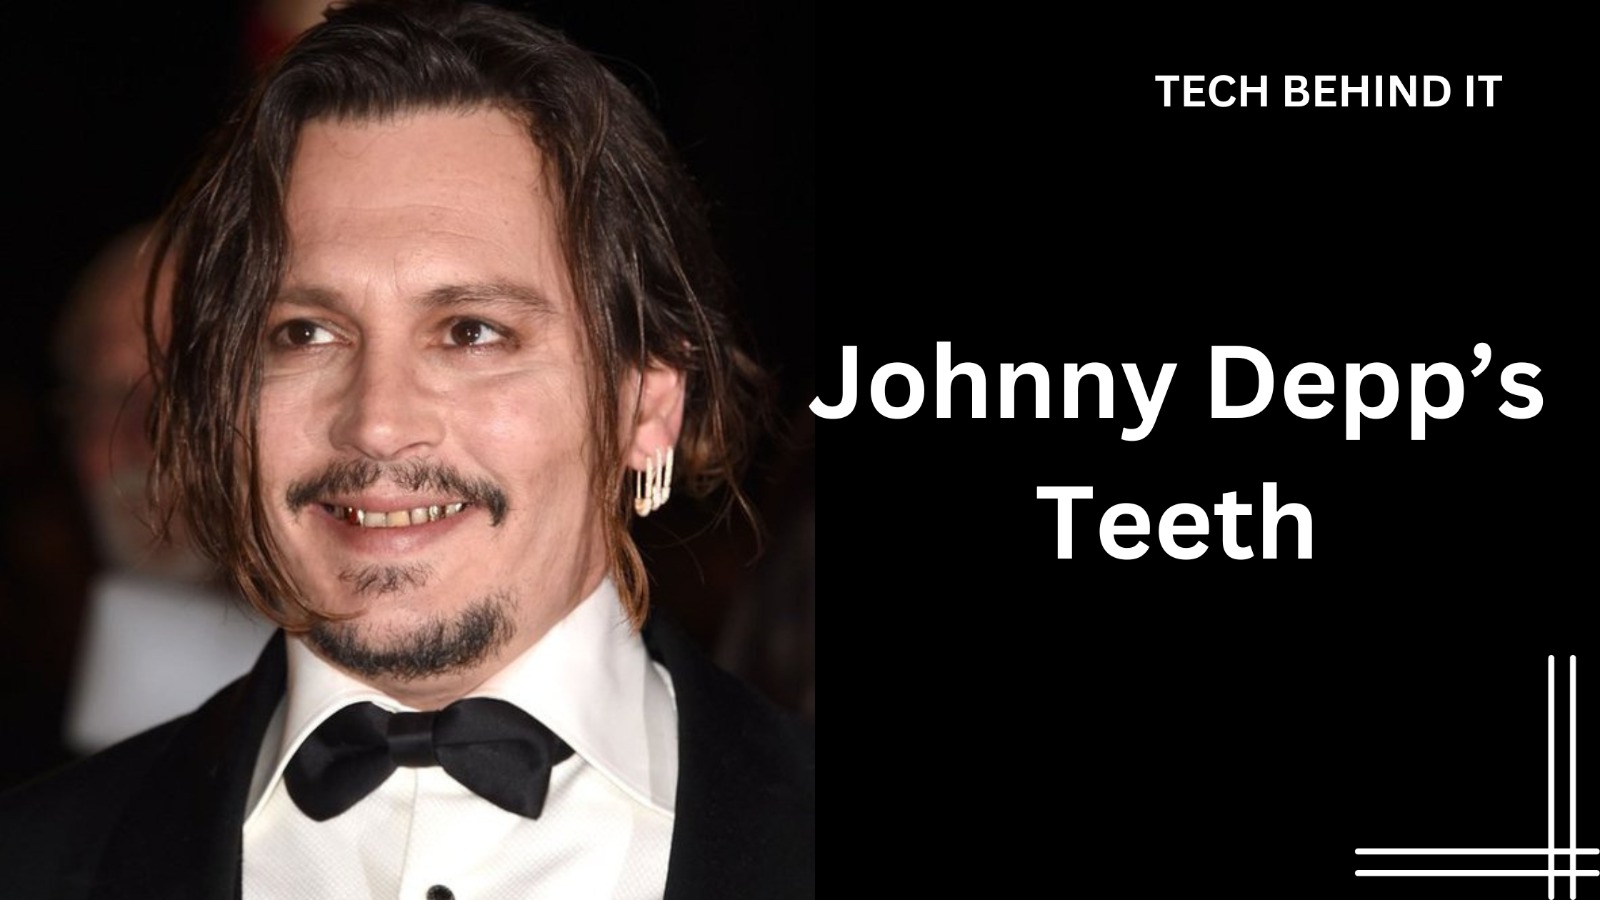 What happened to Johnny Depp’s teeth?